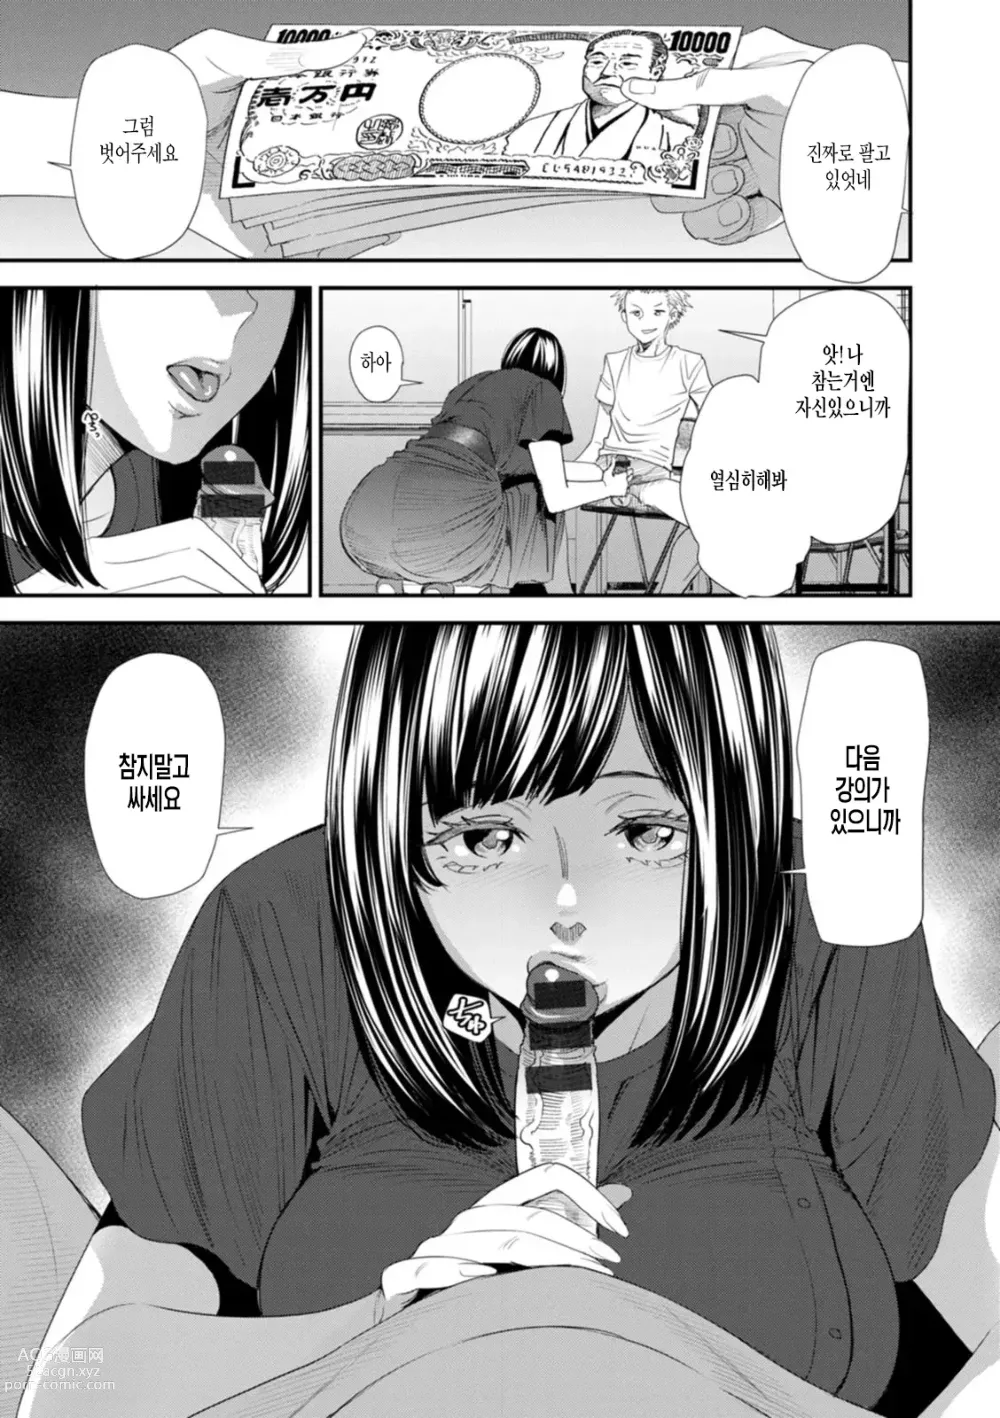 Page 13 of manga Inma Joshi Daisei no Yuuutsu Ch. 1-3  The Melancholy of the Succubus who is a college student 음마 여대생의 우울